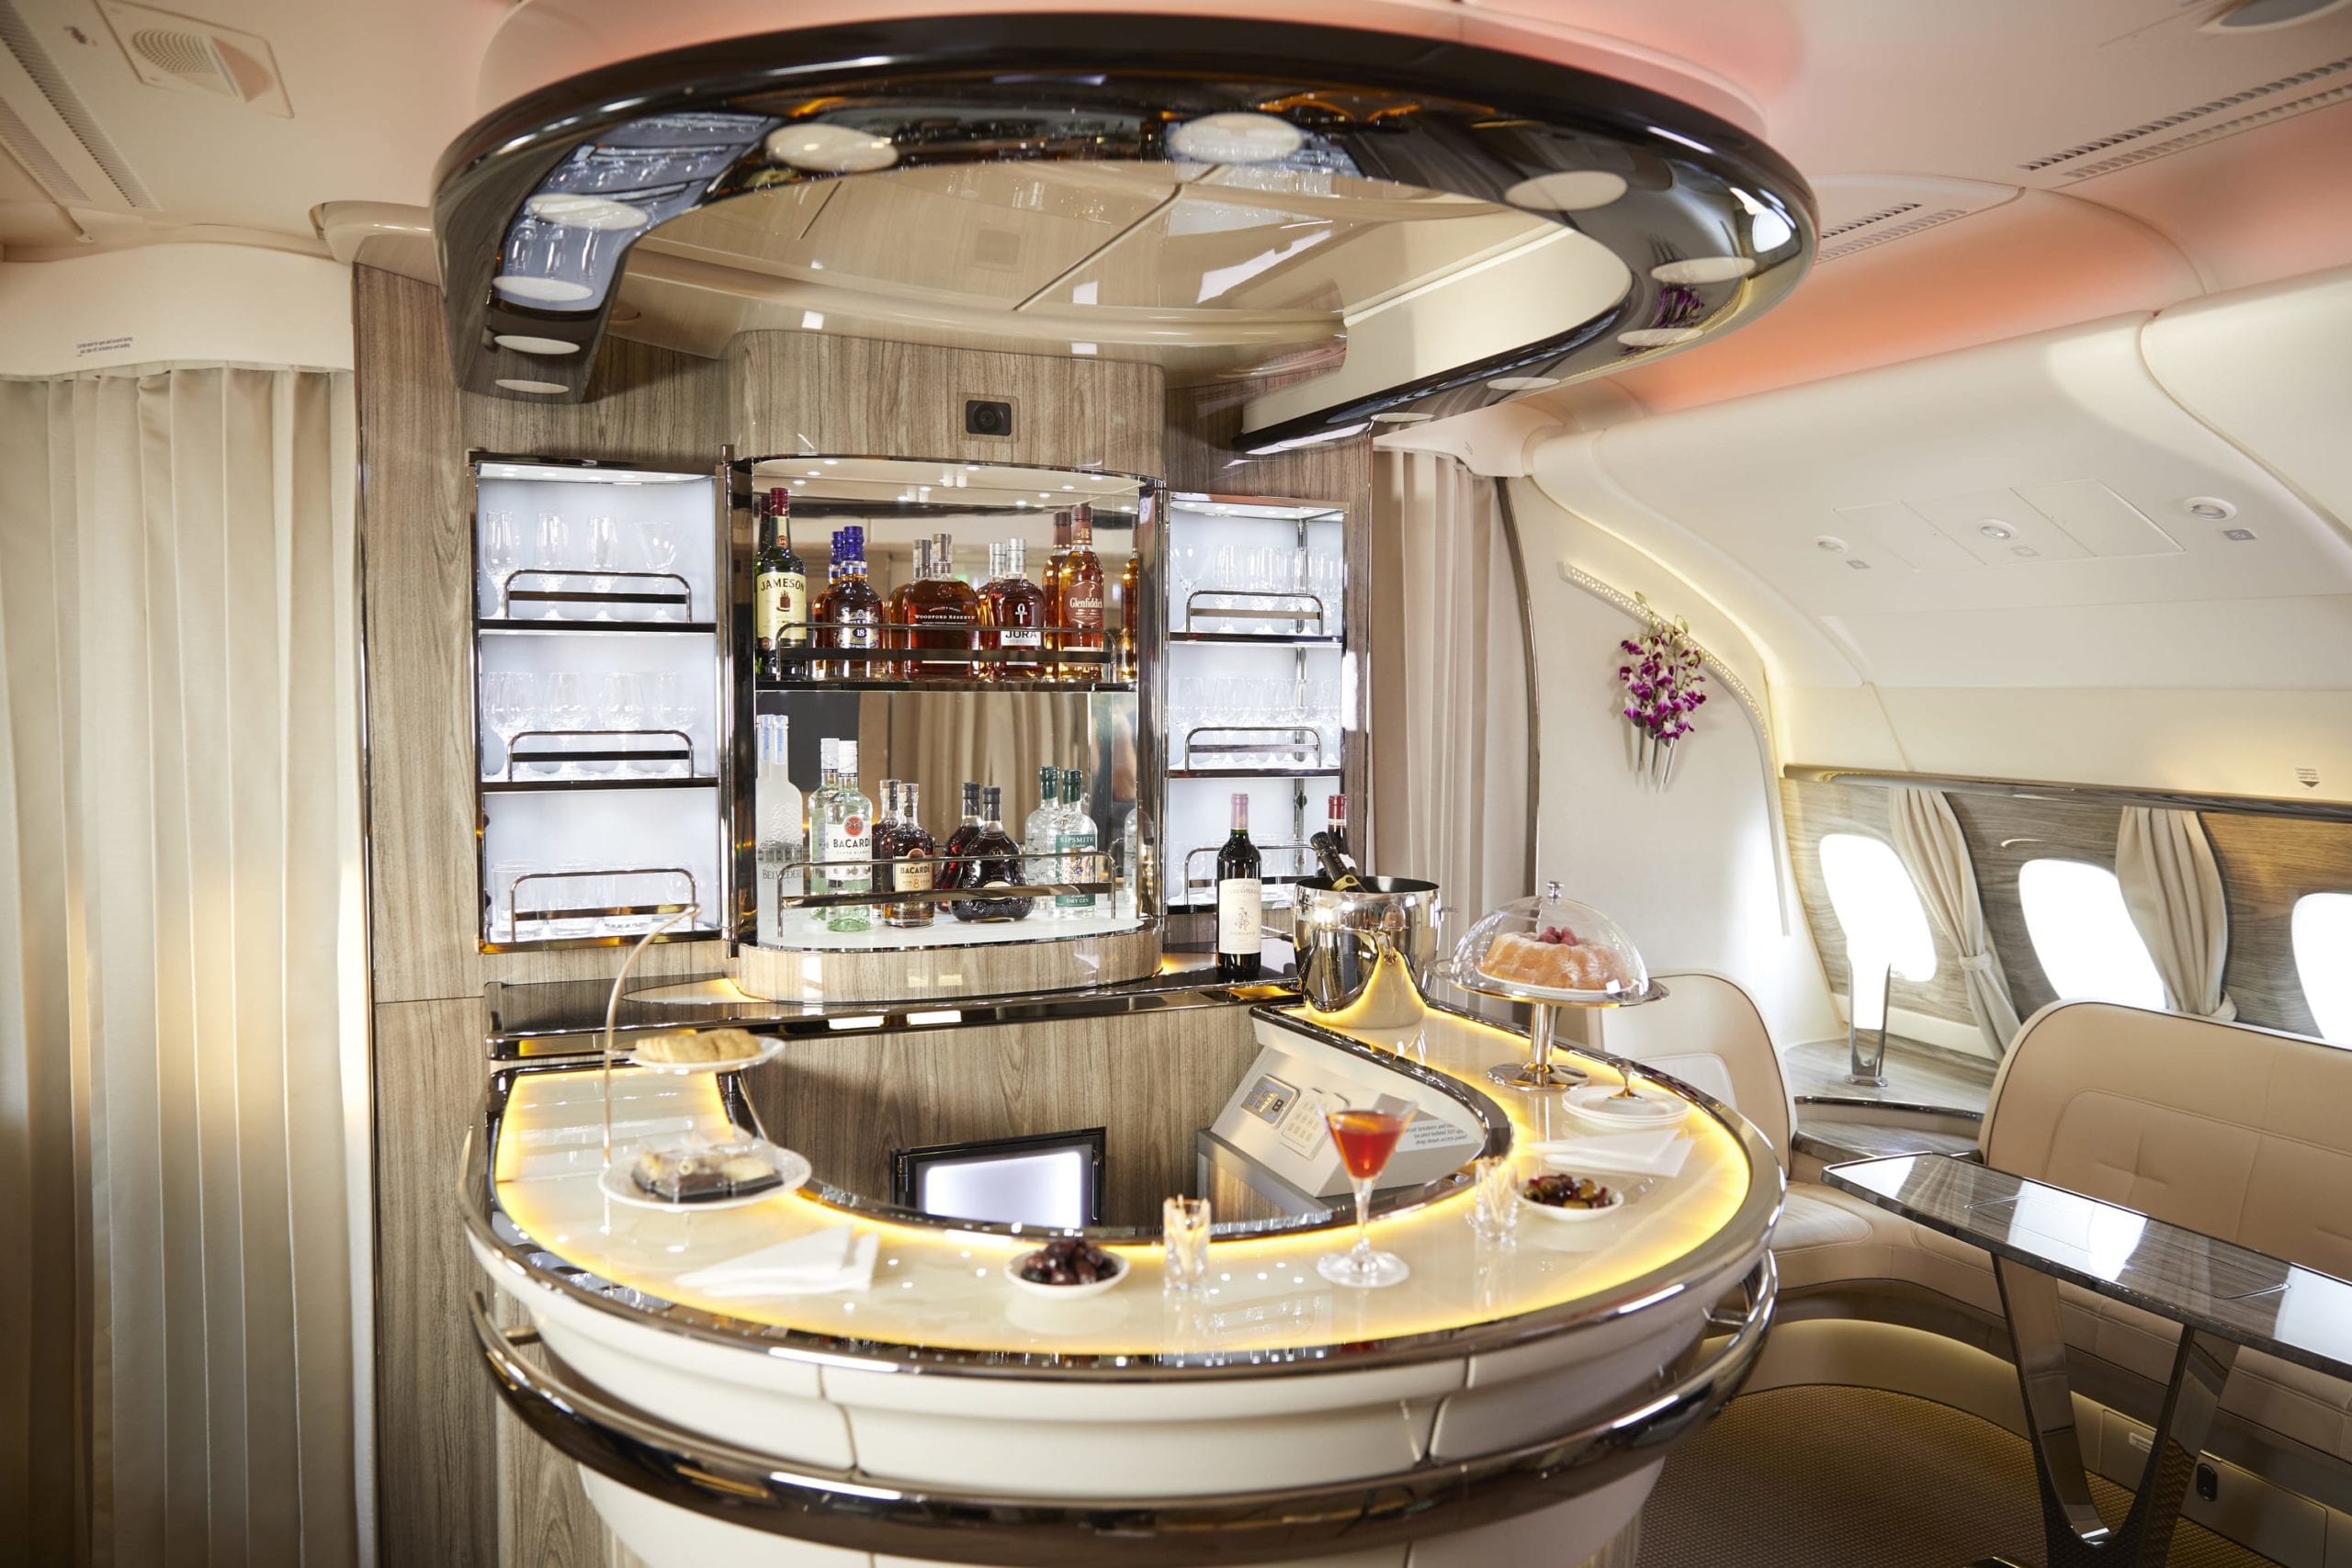 Fly Emirates A380 Business Class Milan to NYC For €1650, Upgrade To